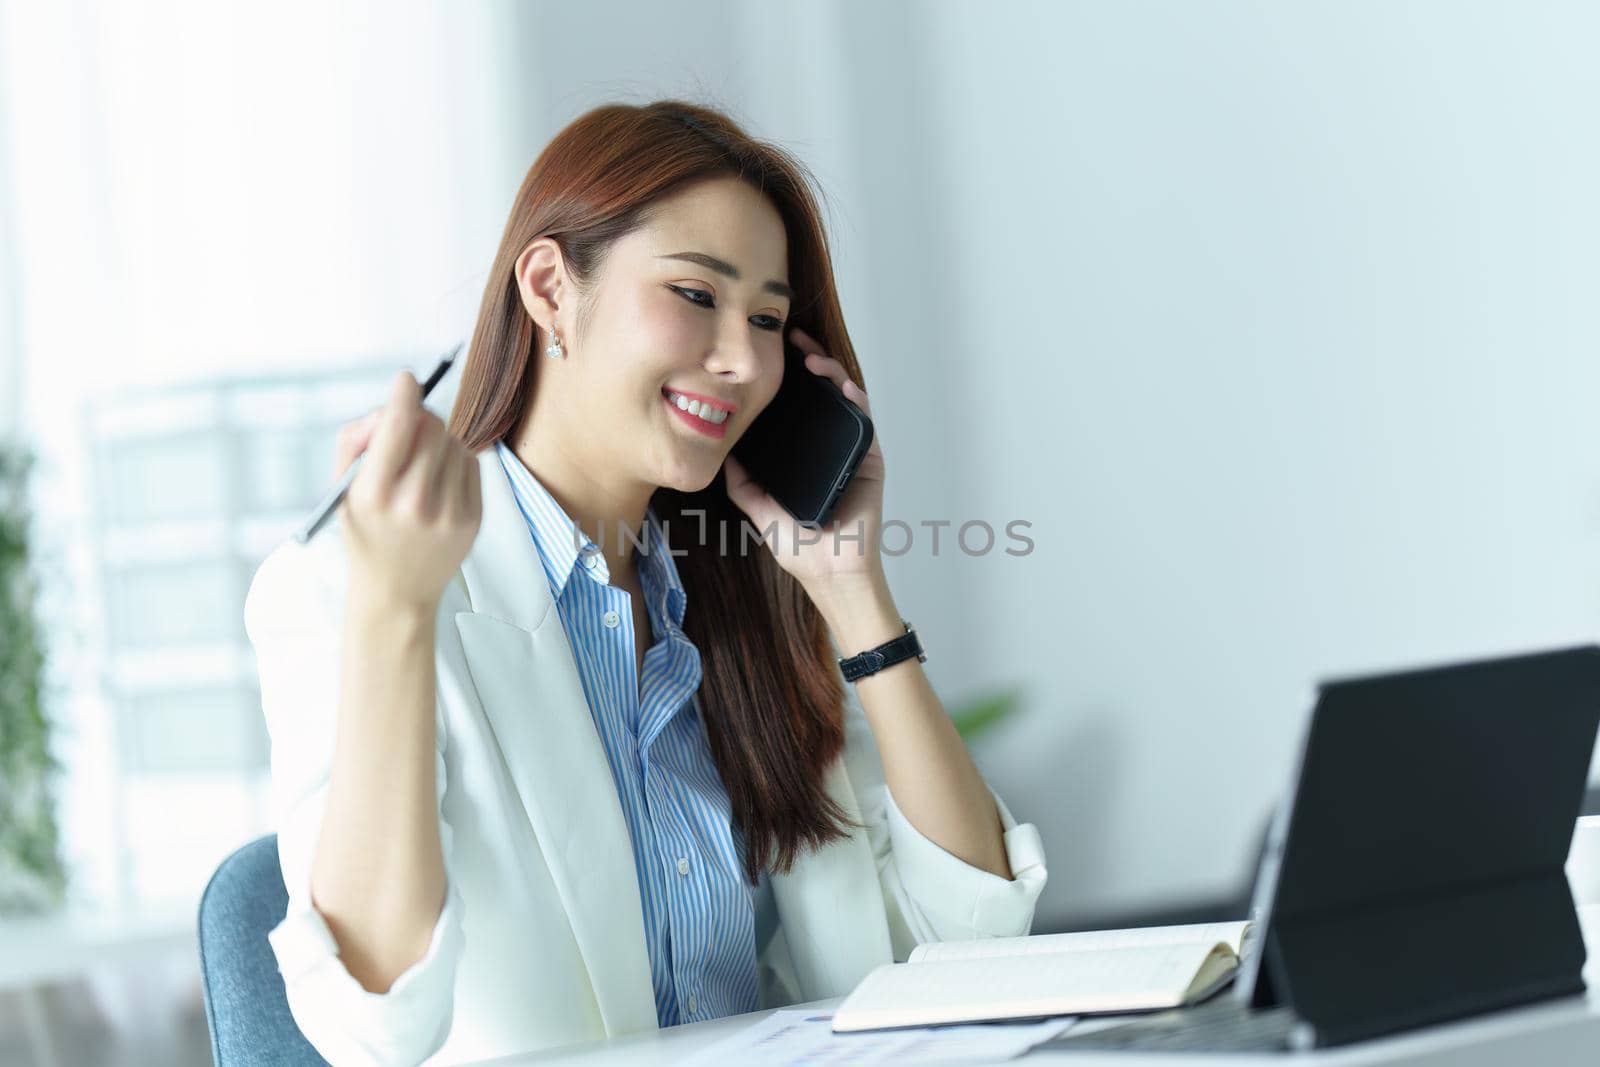 Portrait of an Asian businesswoman or business owner smiling and talking on a mobile phone in the office.